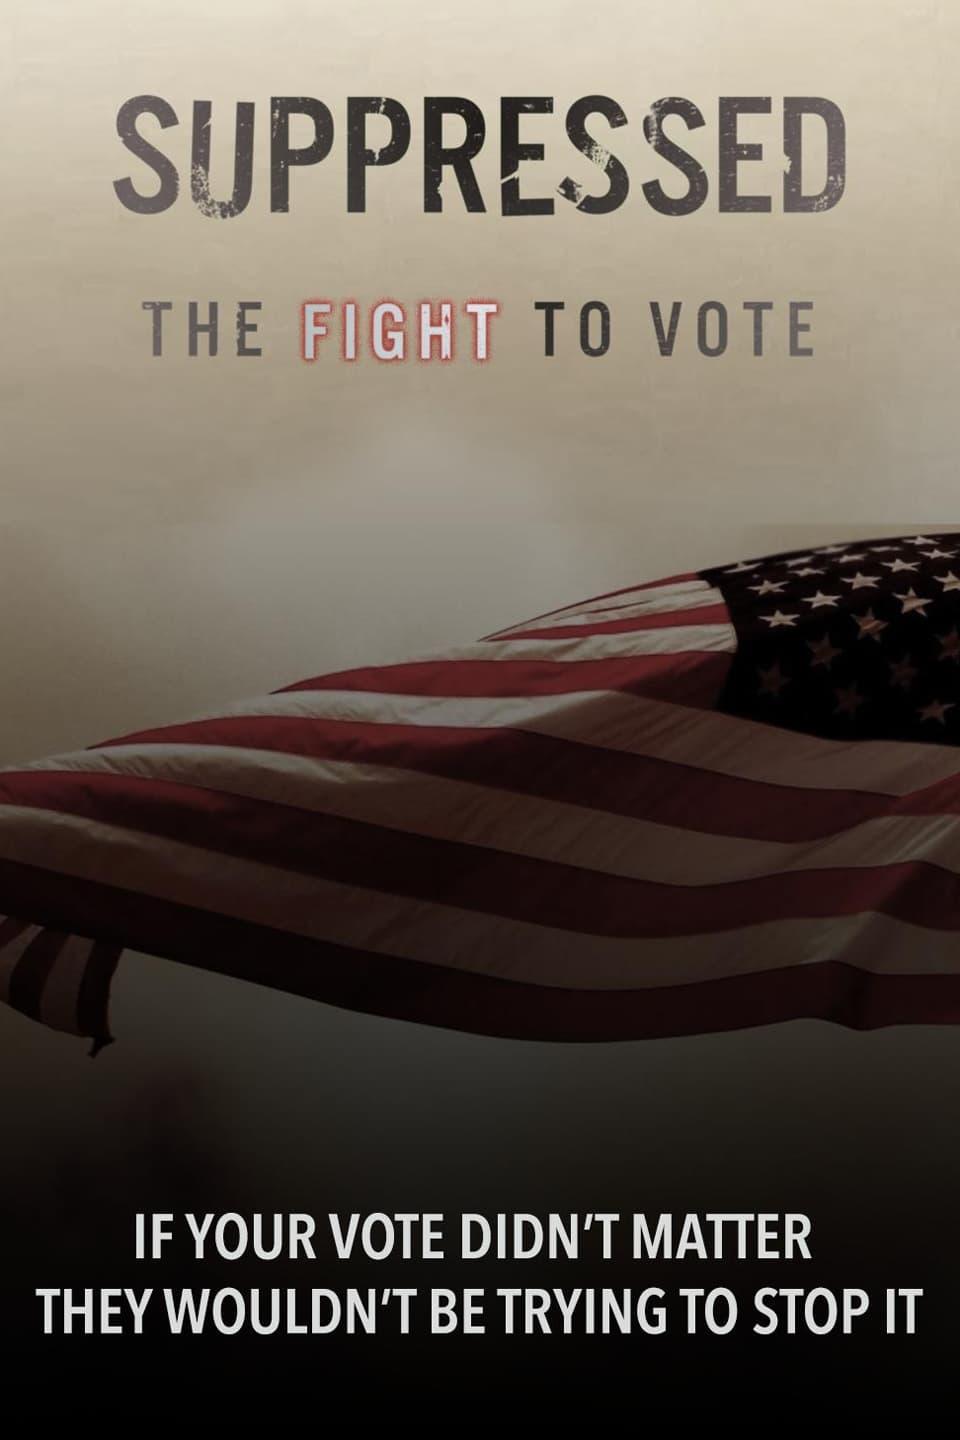 Suppressed: The Fight to Vote poster